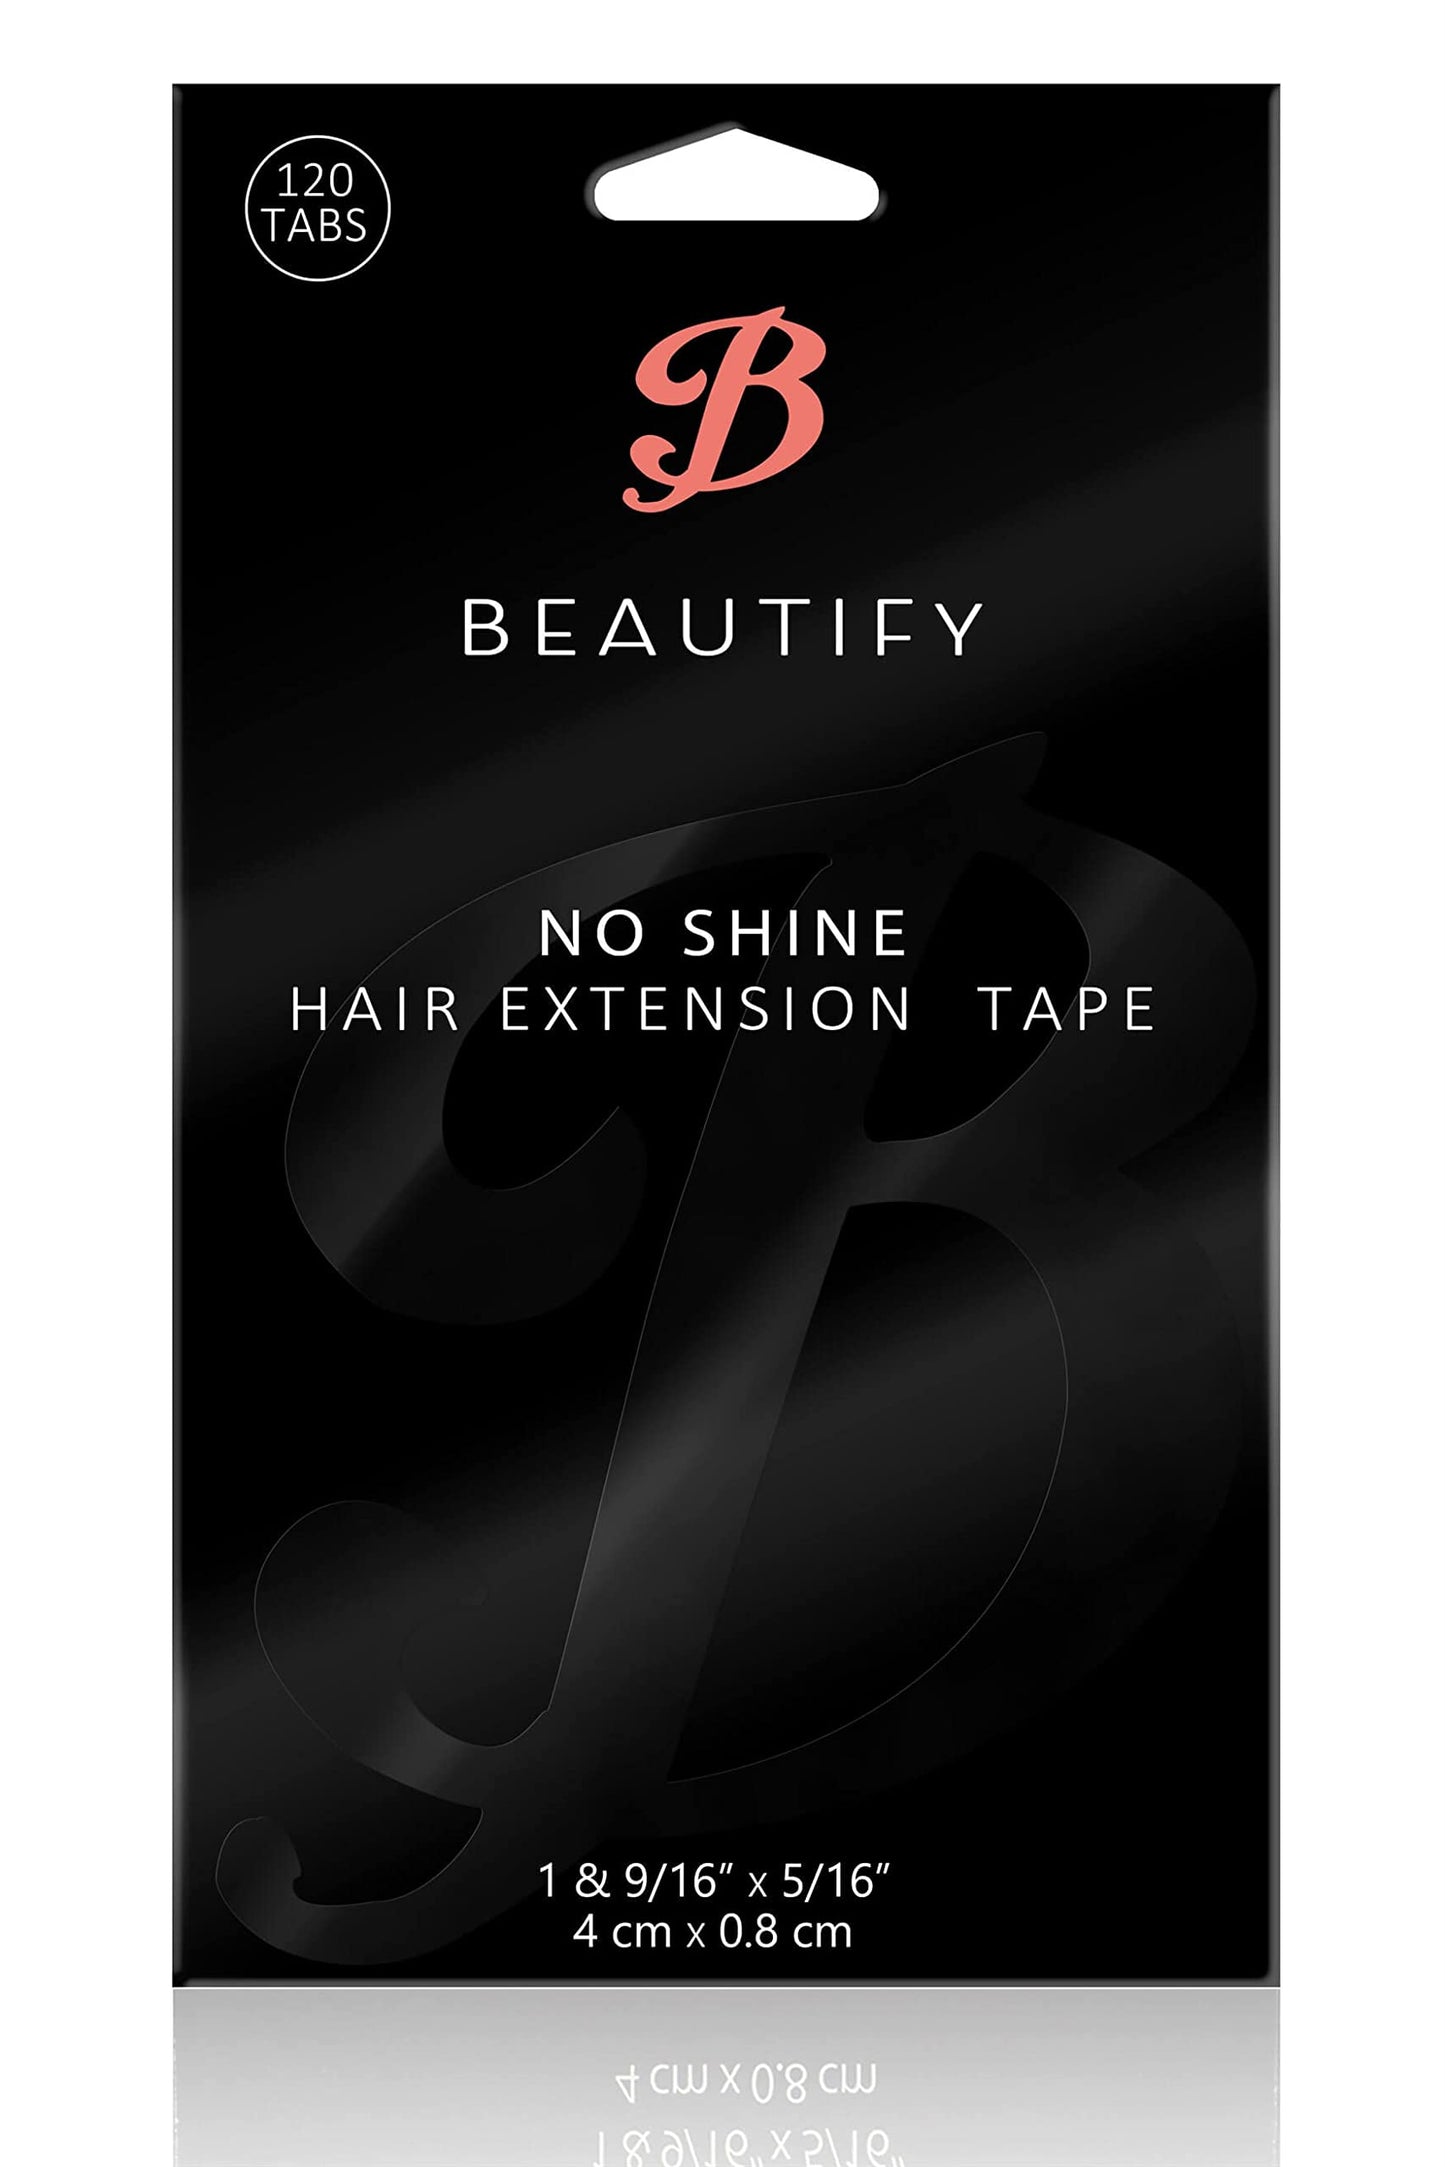 No Shine by BEAUTIFY Hypoallergenic Double Sided Hair Extension Tape, 4 cm x 0.8 cm, 120 Pre-Cut Tabs, One Color